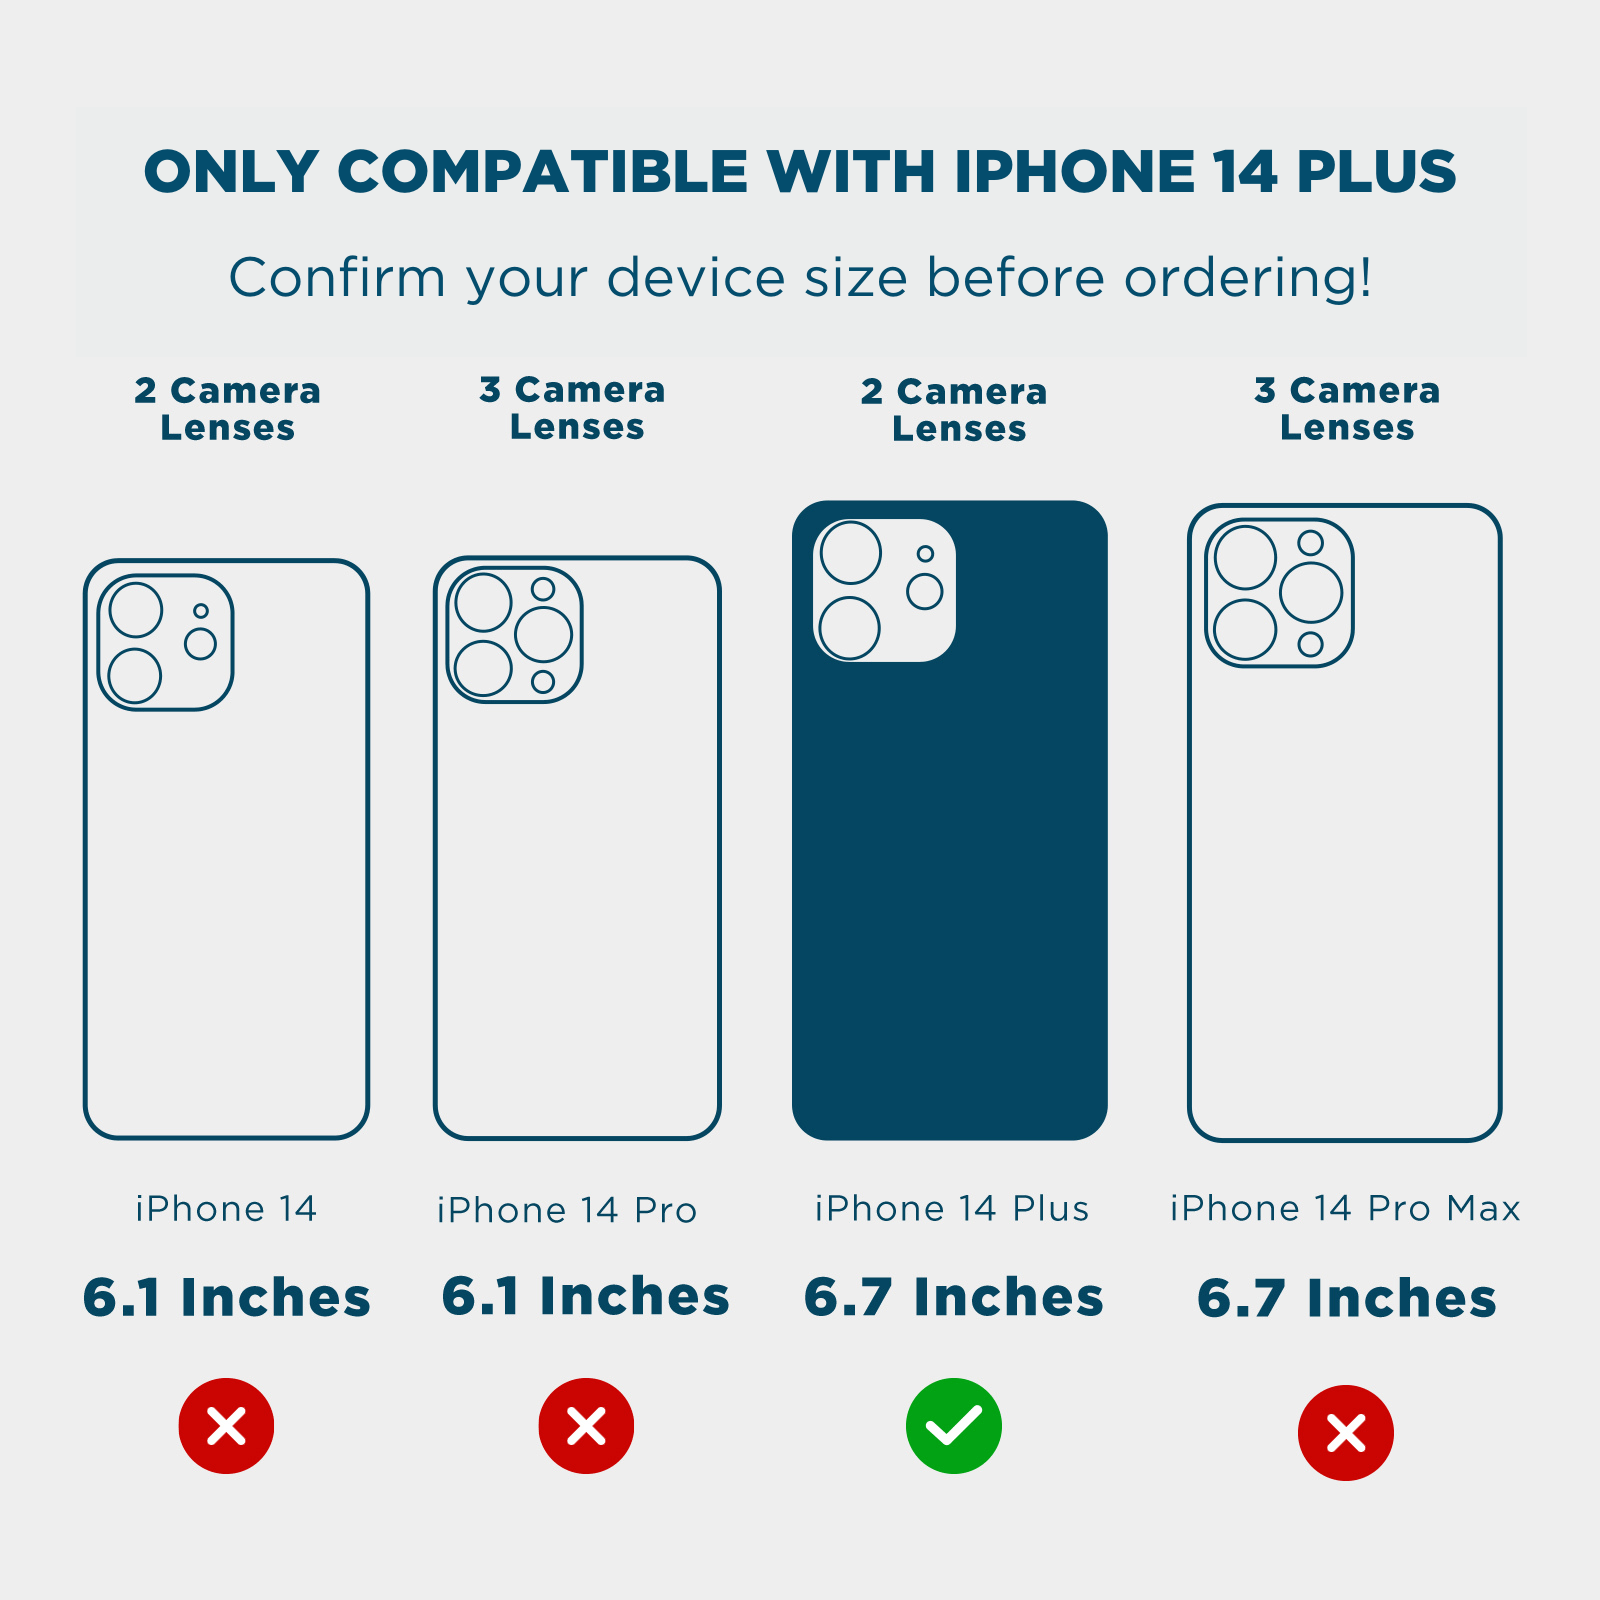 ONLY COMPATIBLE WITH IPHONE 14 PLUS. CONFIRM YOUR DEVICE SIZE BEFORE ORDERING! 2 CAMERA LENSES, 3 CAMERA LENSES, 2 CAMERA LENSES, 3 CAMERA LENSES, 6.1 INCHEC, 6.1 INCHES, 6.7 INCHES, 6.7 INCHES. COLOR::KARAT MARBLE